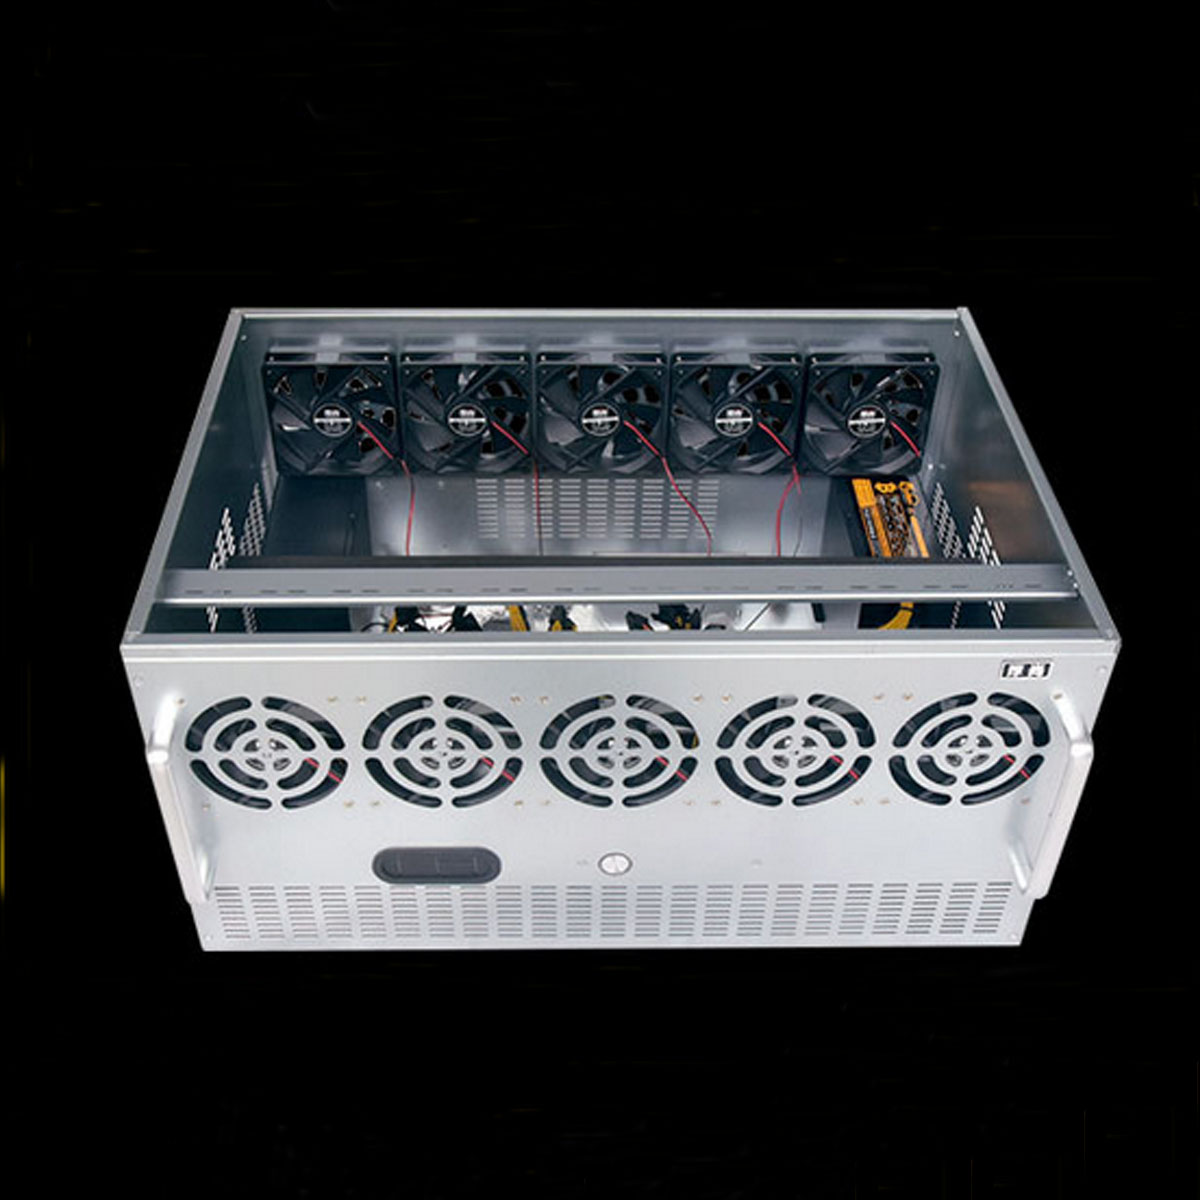 

Mining Frame Rig Case For 12 GPU Mining Crypto Currency Rigs Miner DIY